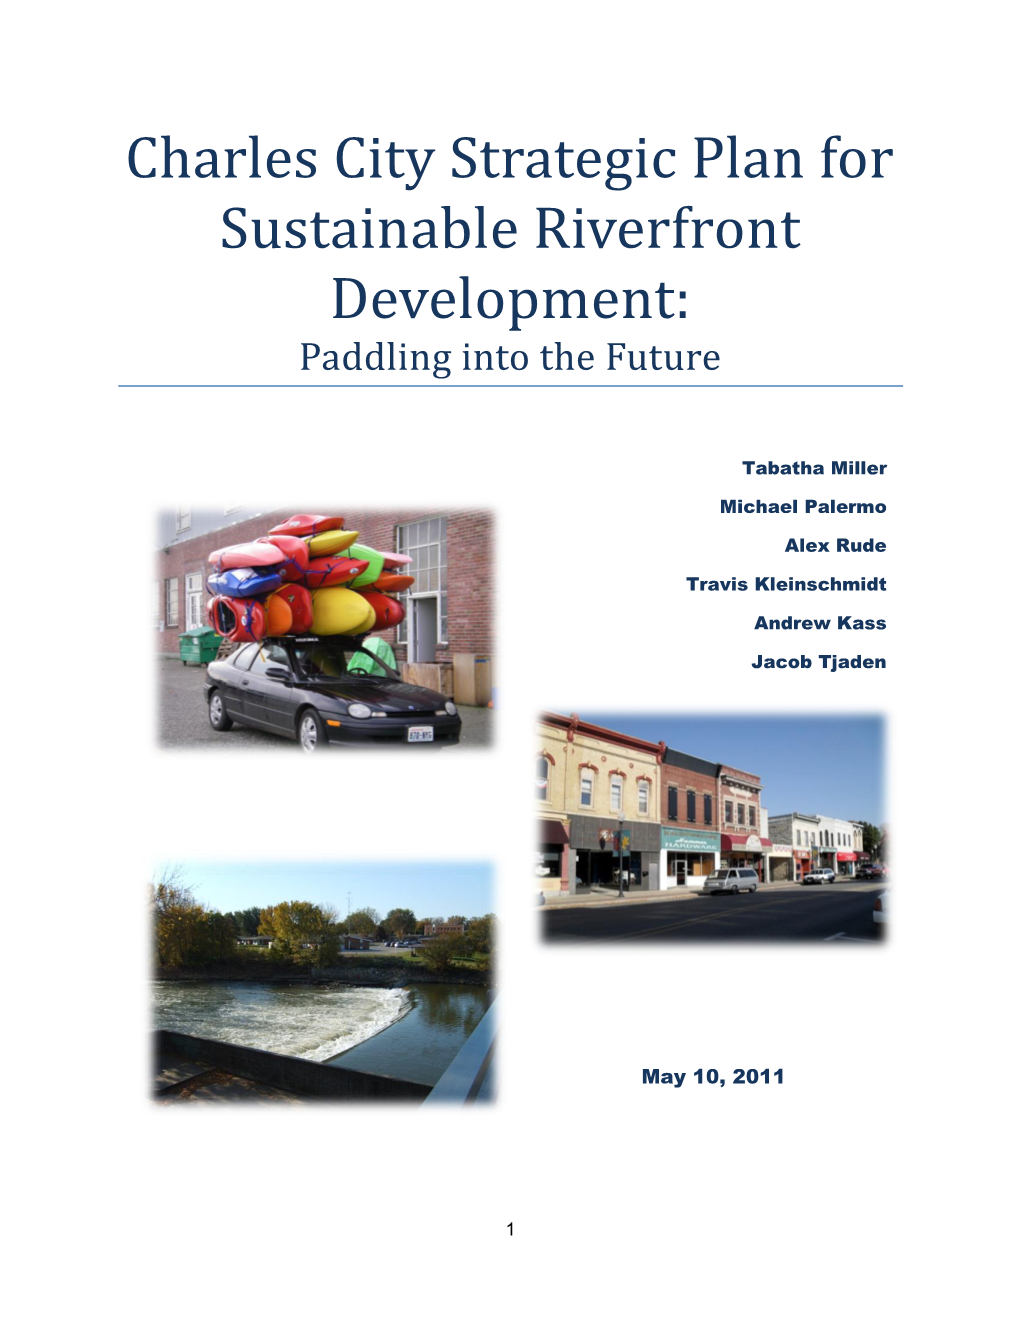 Charles City Strategic Plan for Sustainable Riverfront Development: Paddling Into the Future